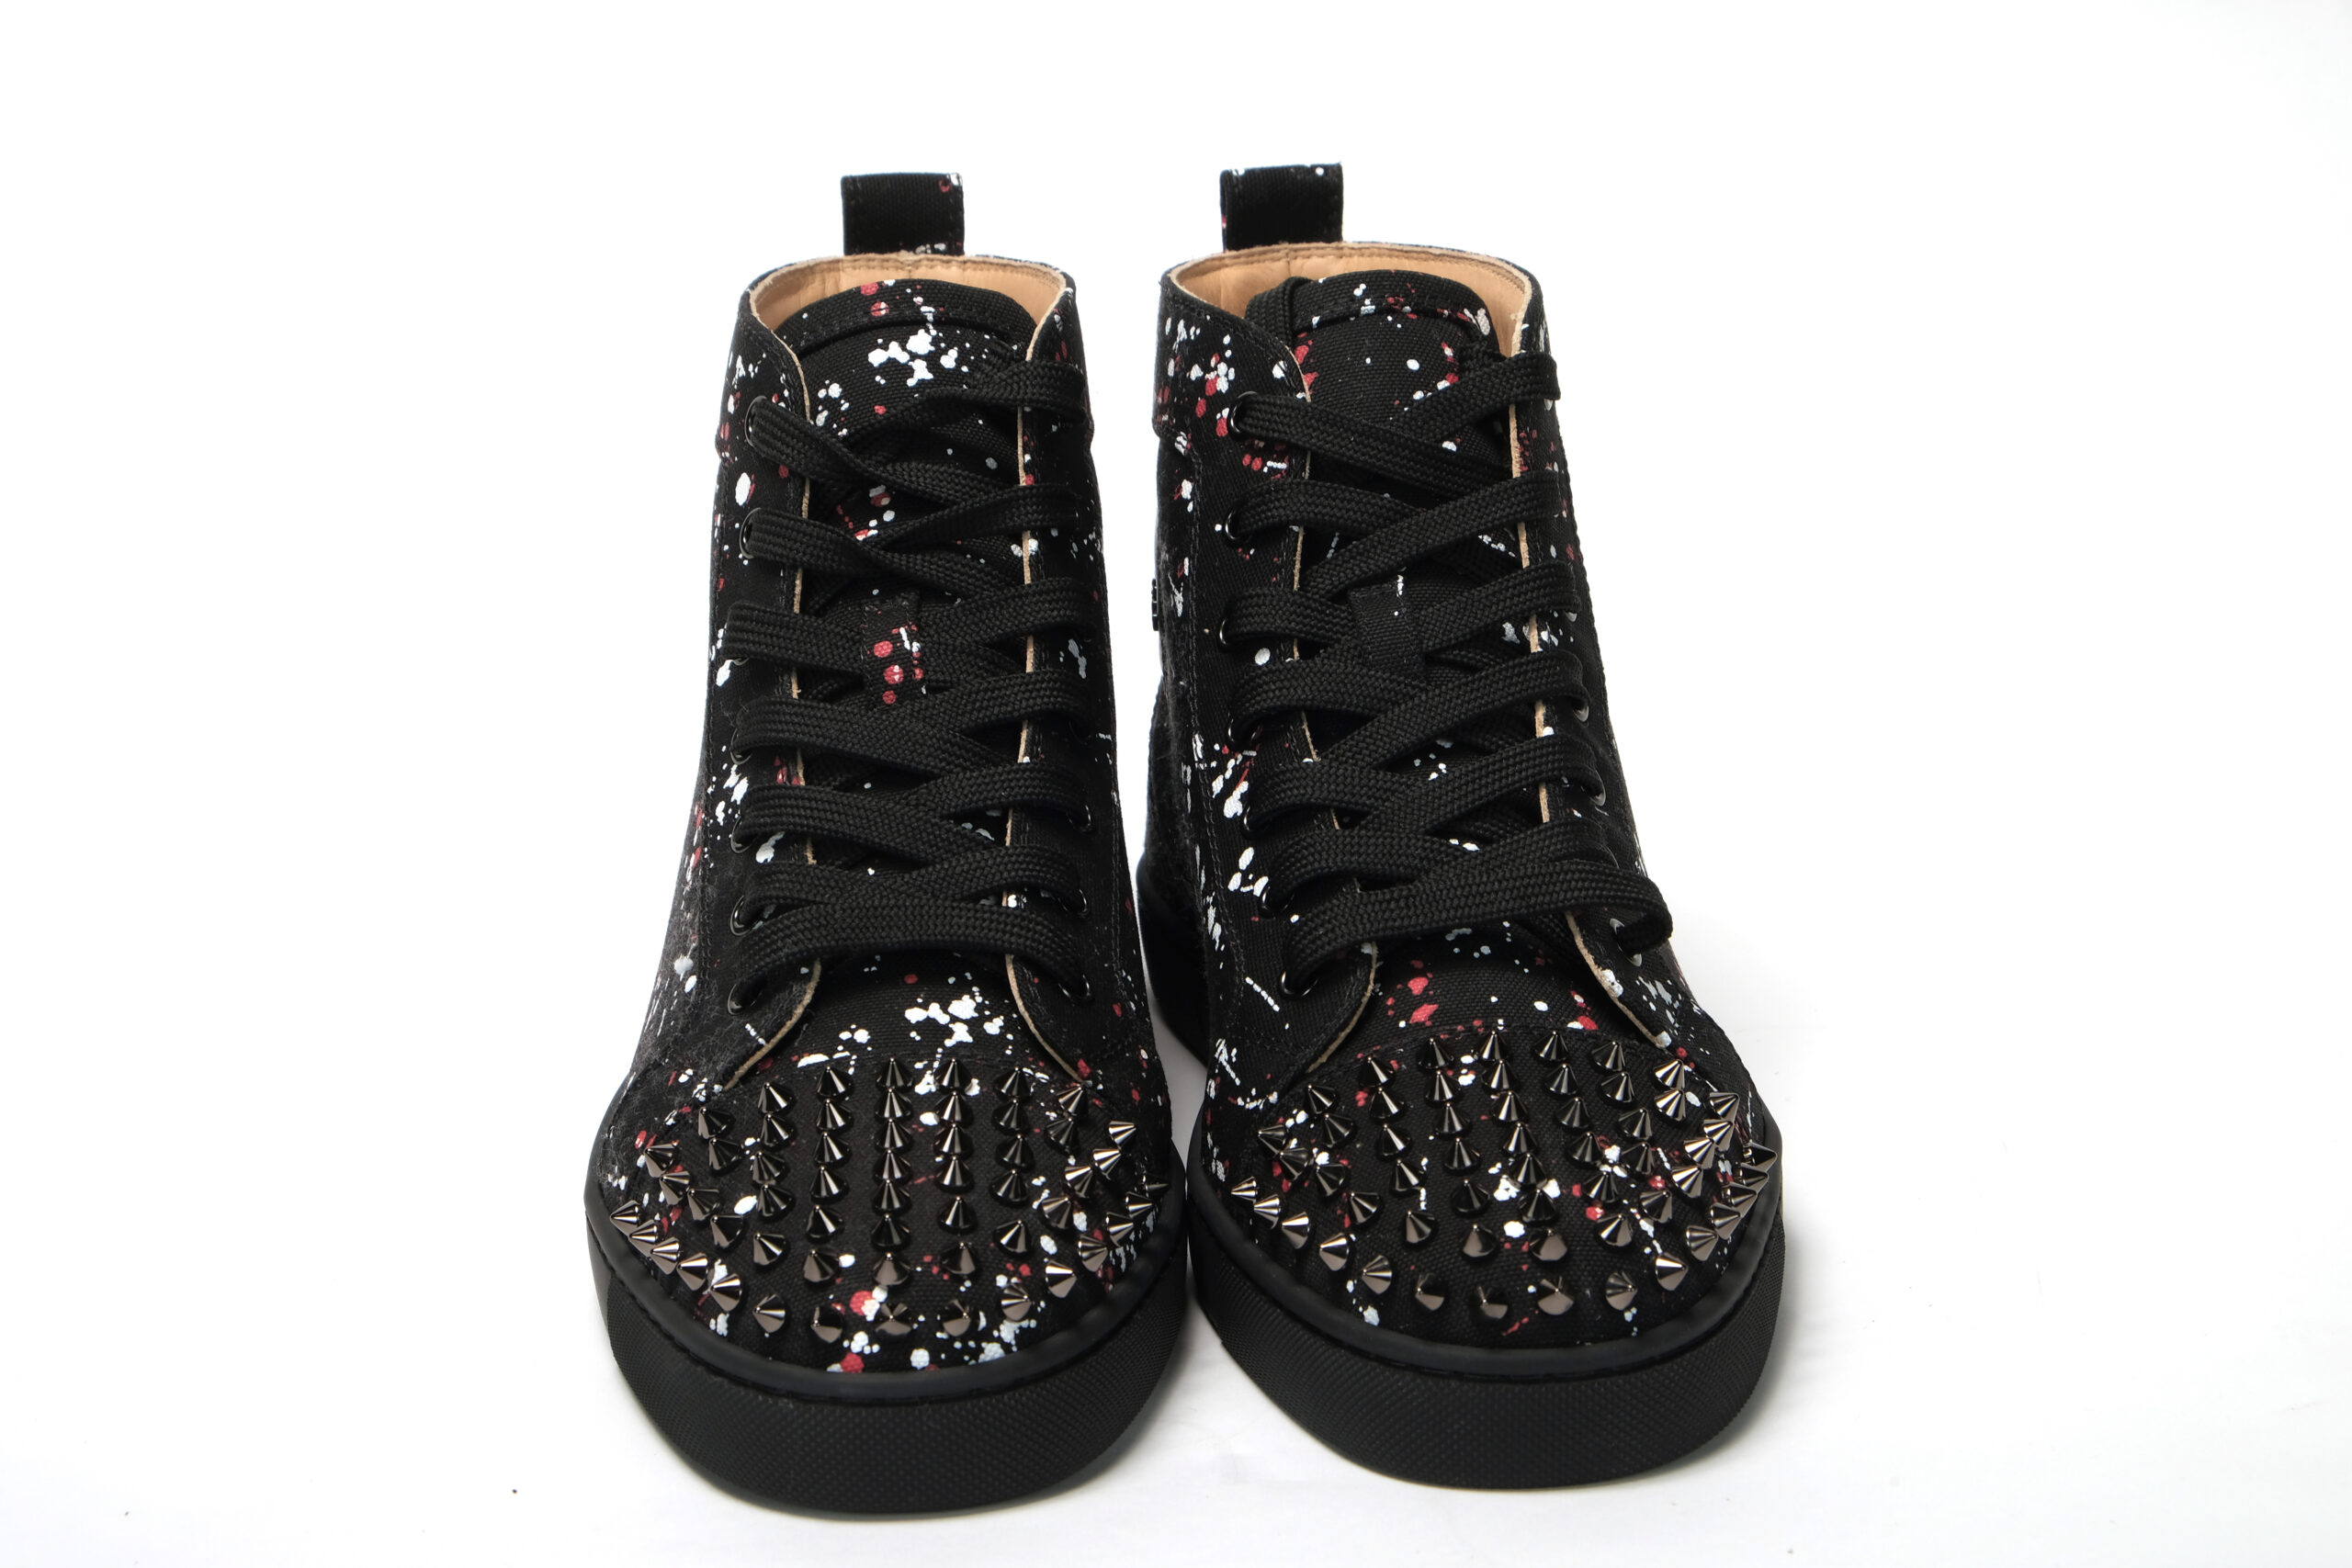 Christian Louboutin Black Leather Louis Spikes High Top Sneakers Size 41.5  Christian Louboutin